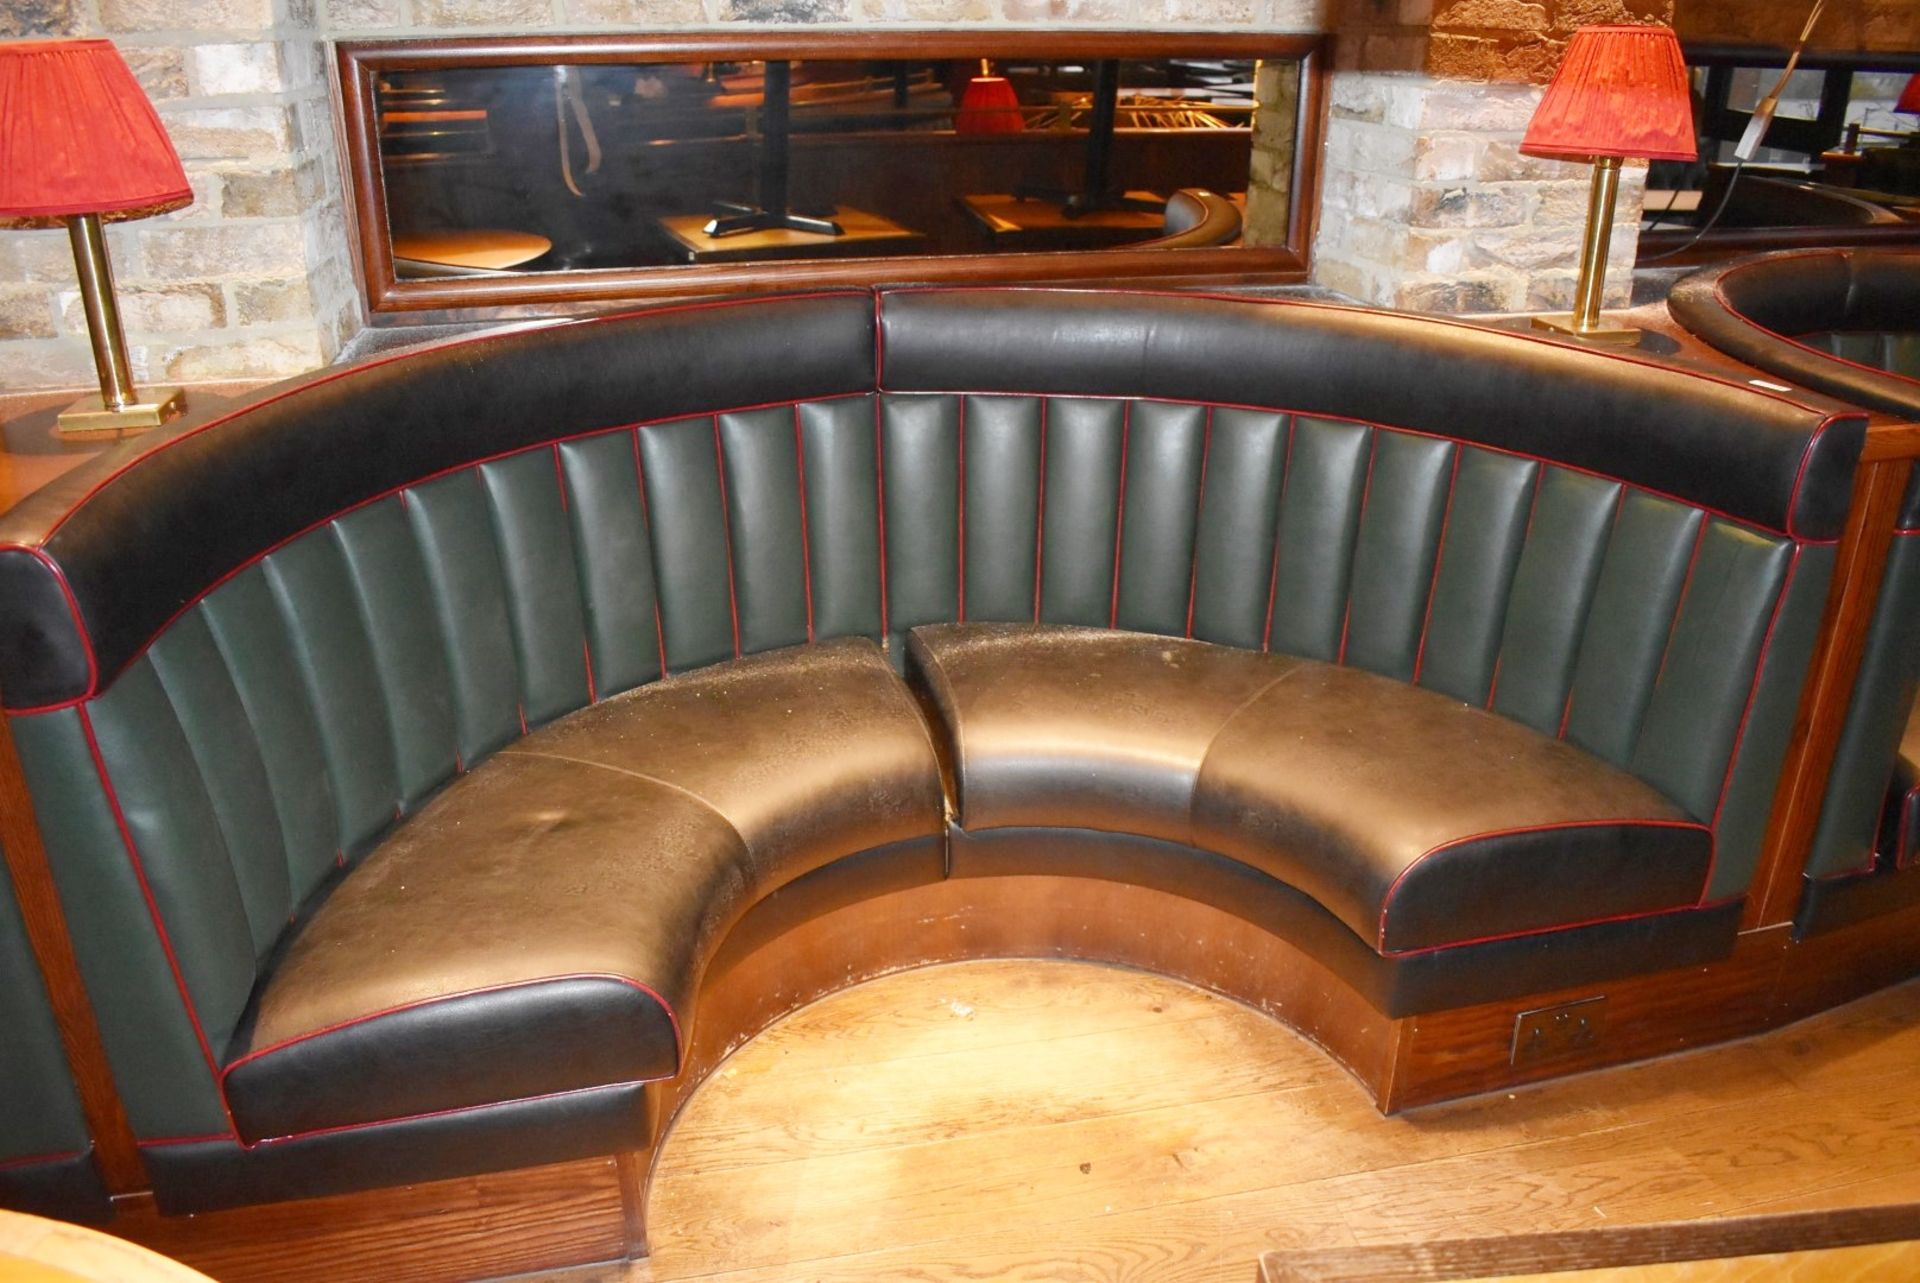 1 x Restaurant C-Shape 4 Person Seating Booth - Green and Black Vertical Fluted Back Upholstery - Image 5 of 5